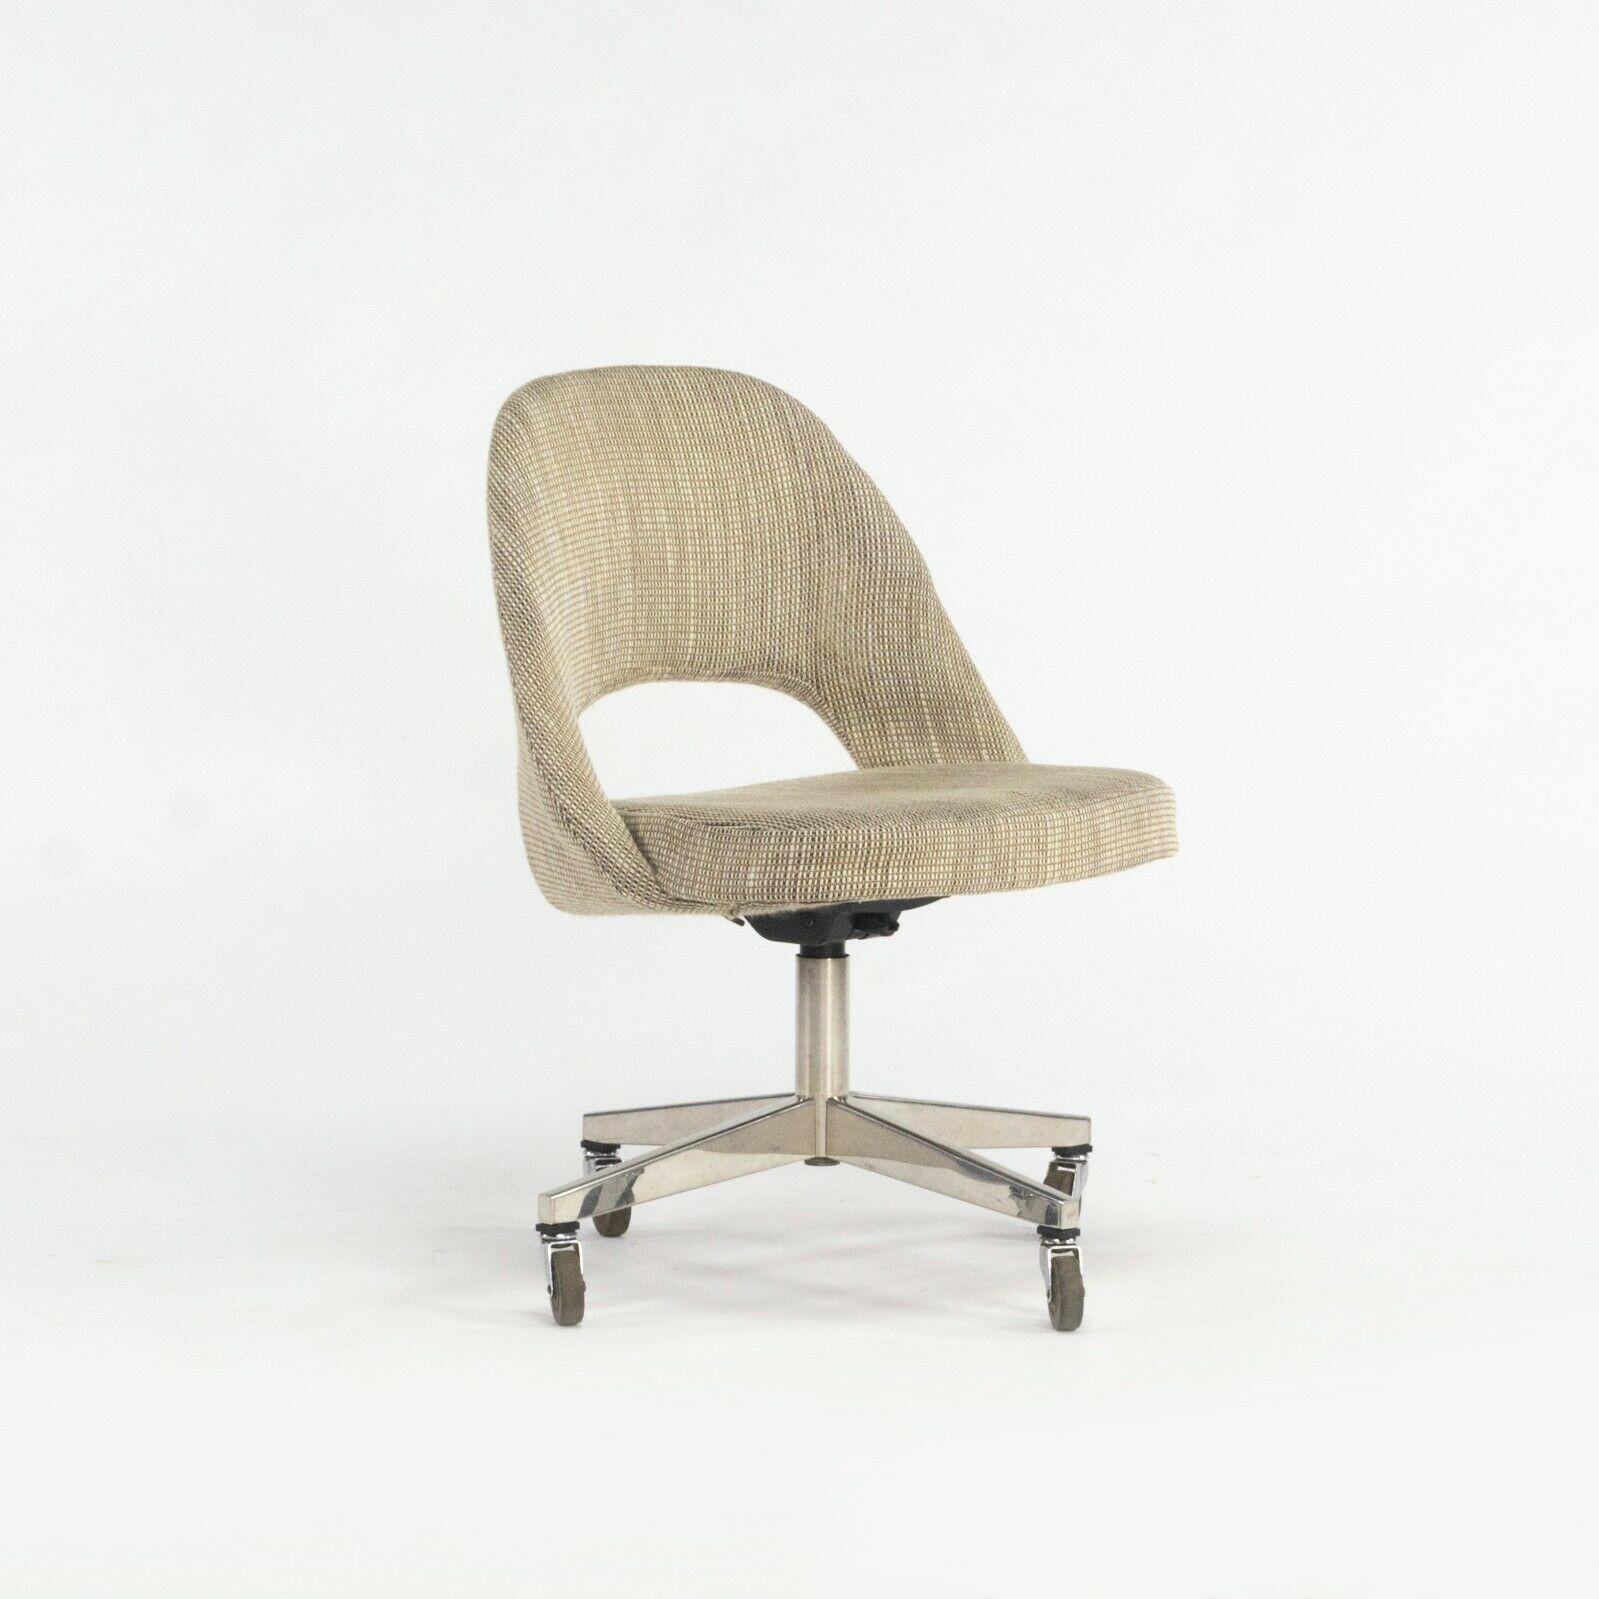 Modern 1974 Eero Saarinen for Knoll Rolling Executive Office Chairs Original Tan Fabric For Sale